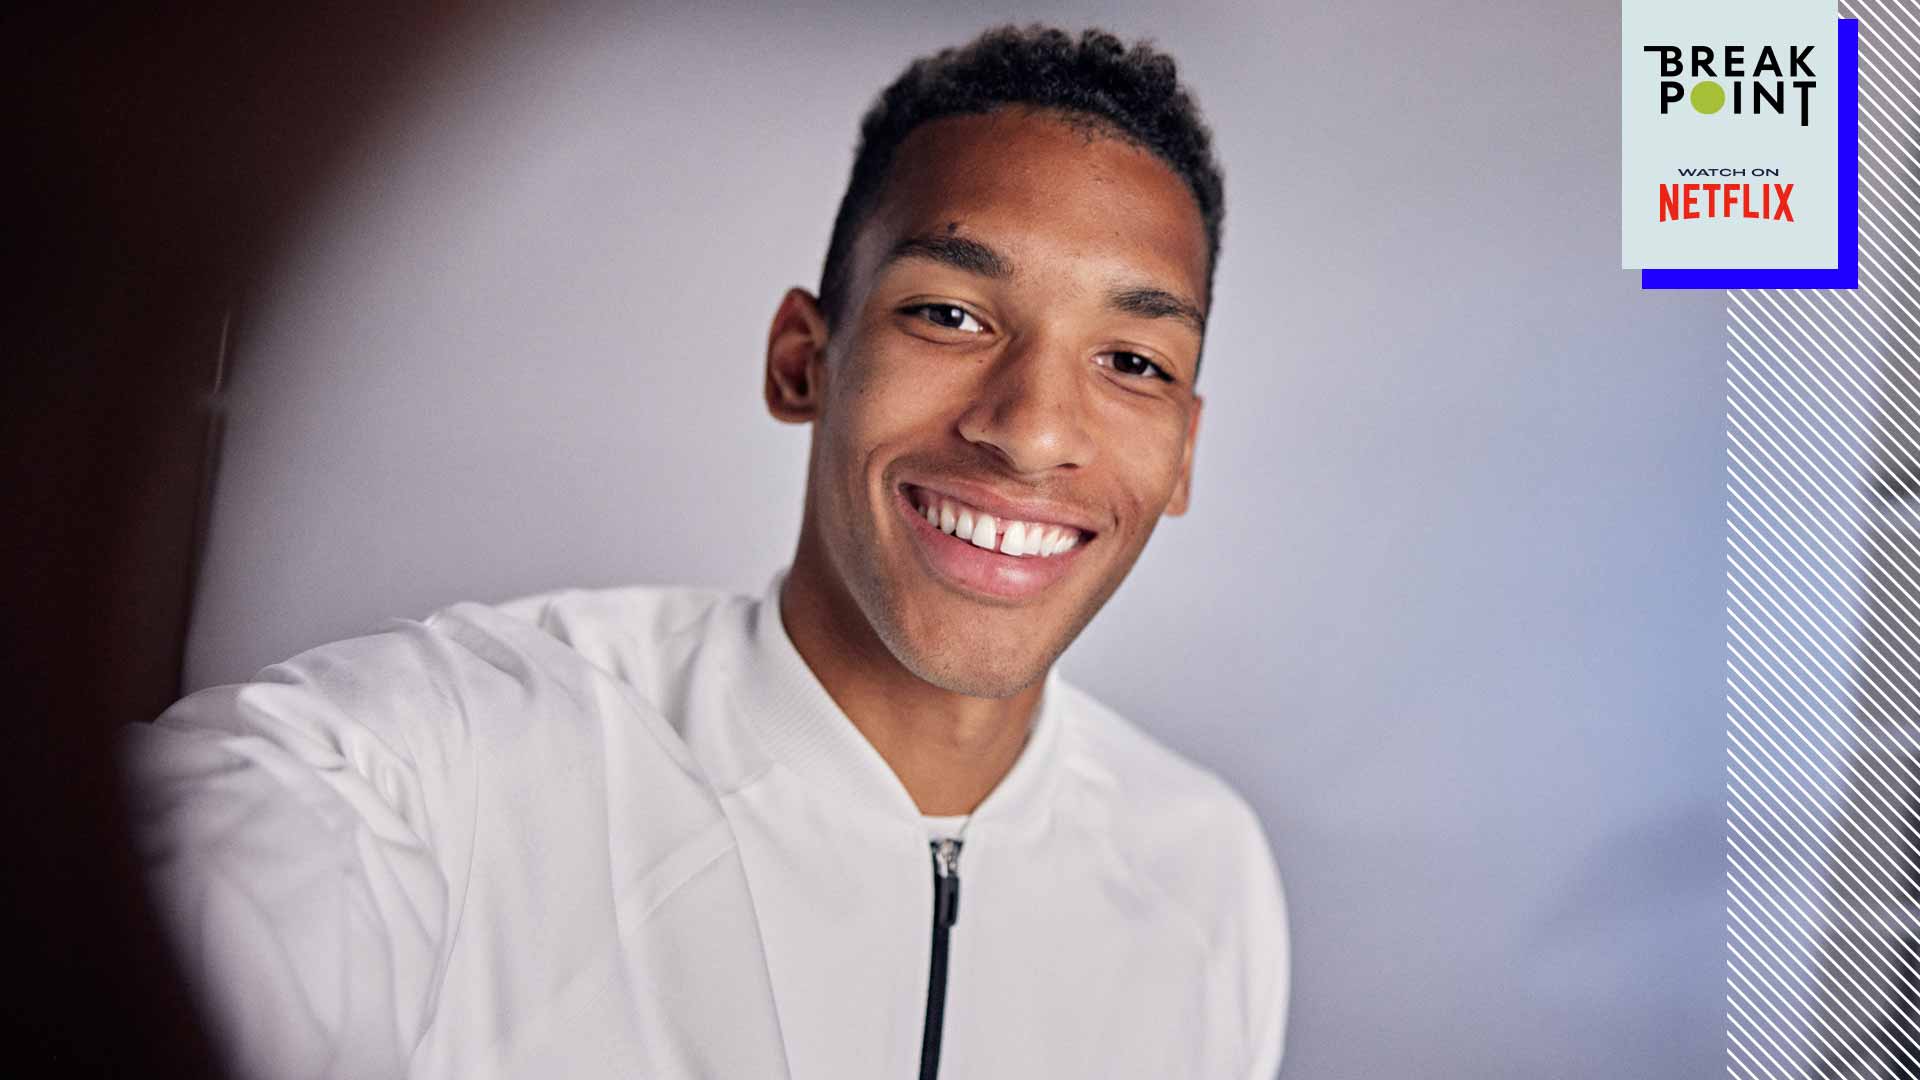 Felix Auger-Aliassime looks forward to learn more about his colleagues when he watches Netflix's Break Point.